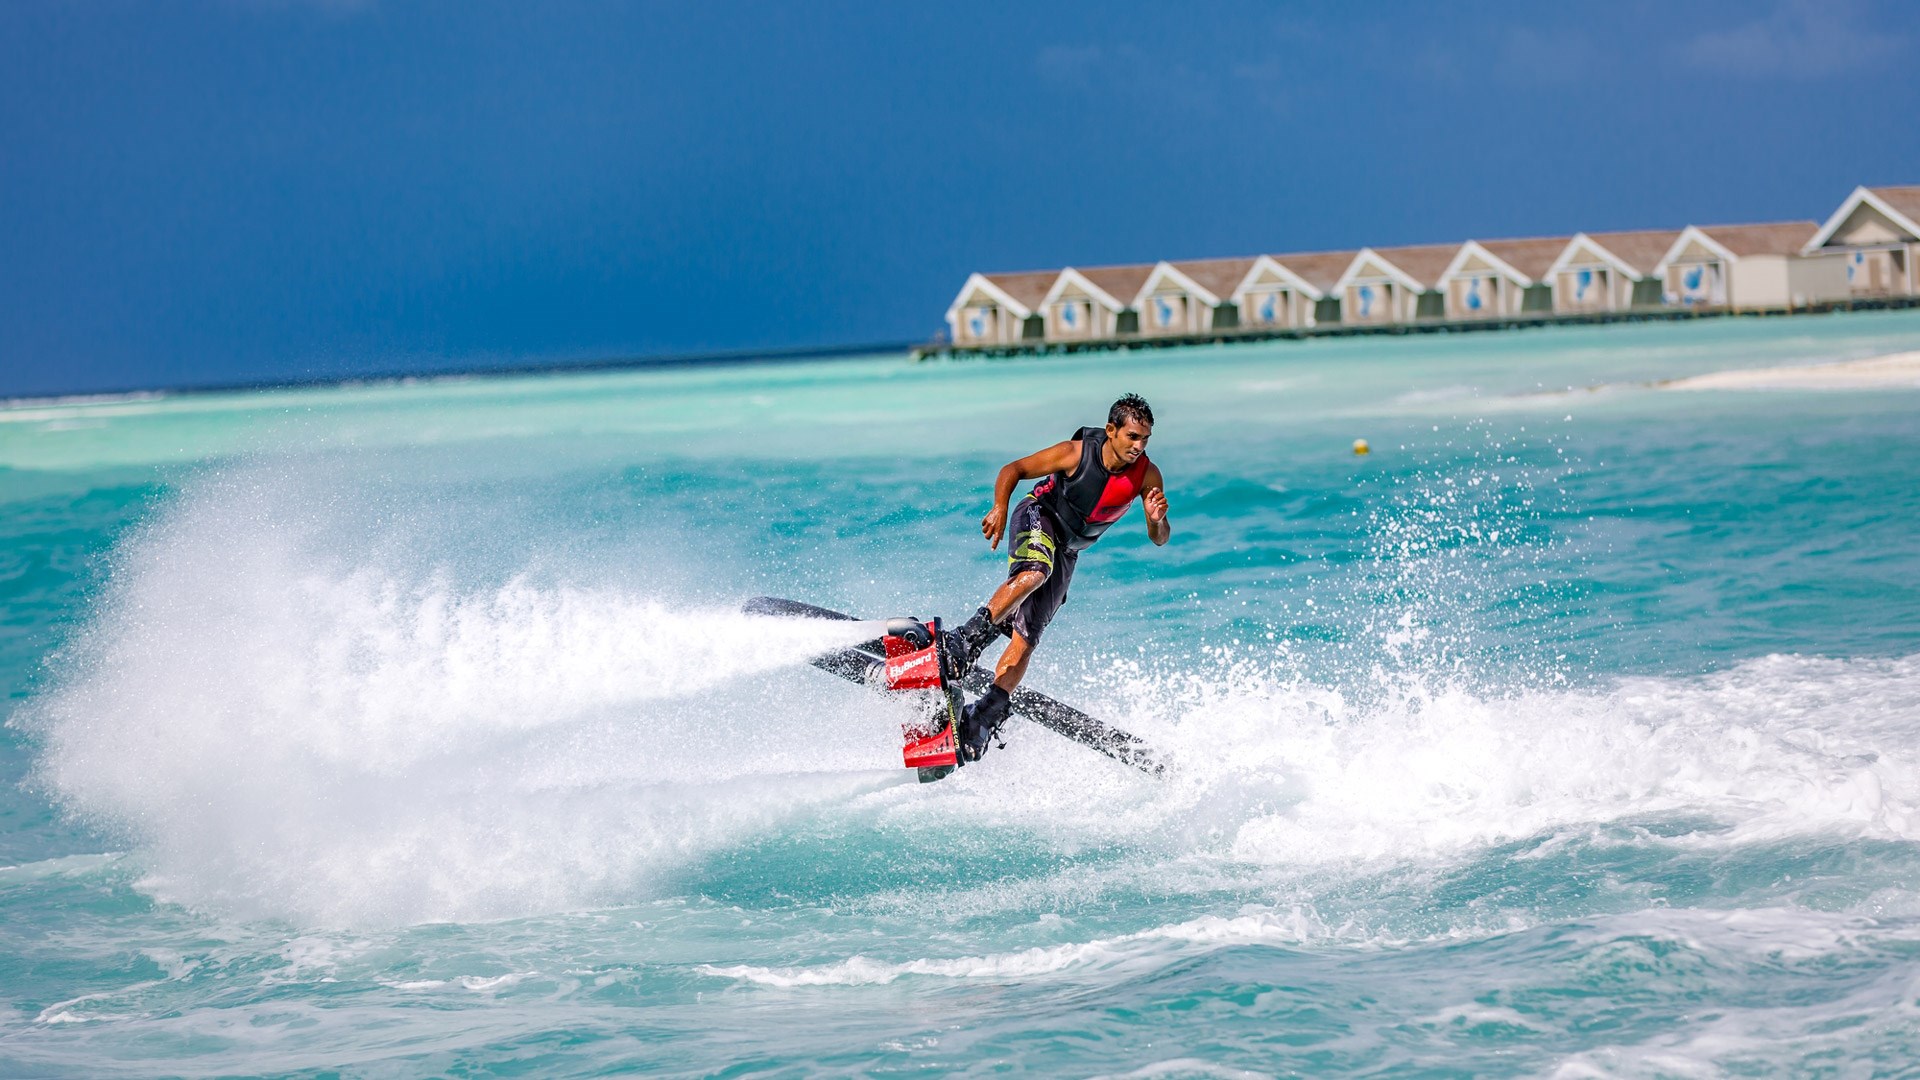 Flyboarding at LUX* South Ari Atoll